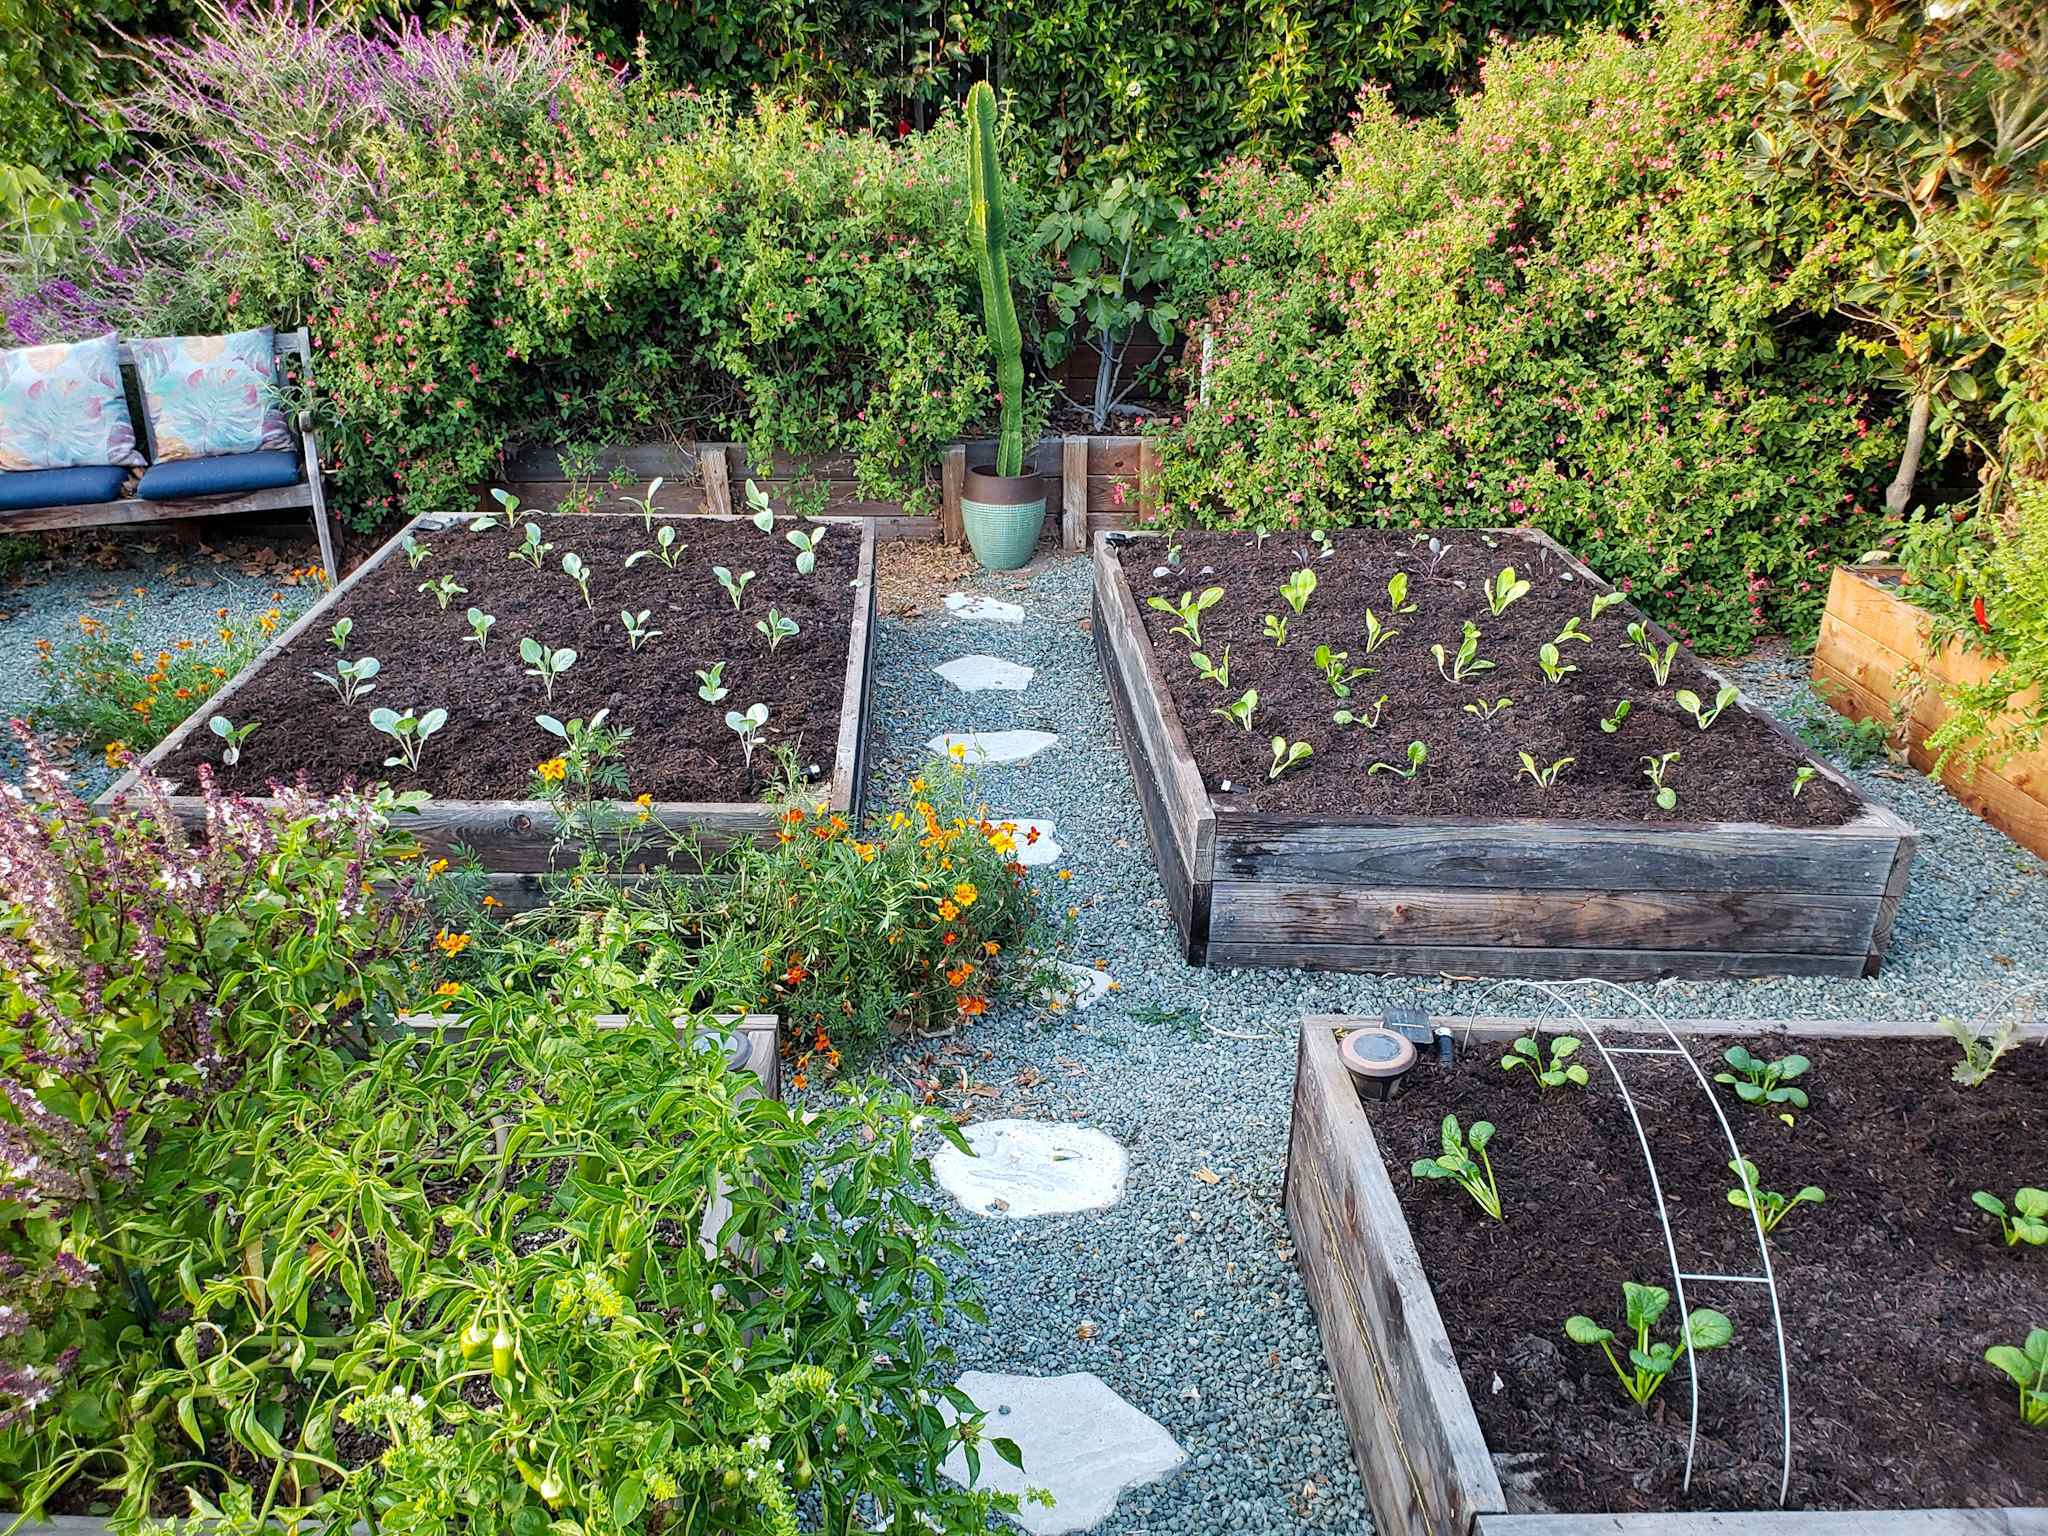 Four raised garden beds are shown, three of which have been recently amended, planted with fresh seedlings, and mulched with compost. The seedlings are in neat rows and are standing straight up towards the sun, showing that they are happy in their new home. The fourth garden bed still contains mature plants that will soon be gotten rid of and the bed will be treated in a similar manner as the other three. The background is a green wall of flowering salvia, sage, cacti, small trees, and passion fruit vines. 